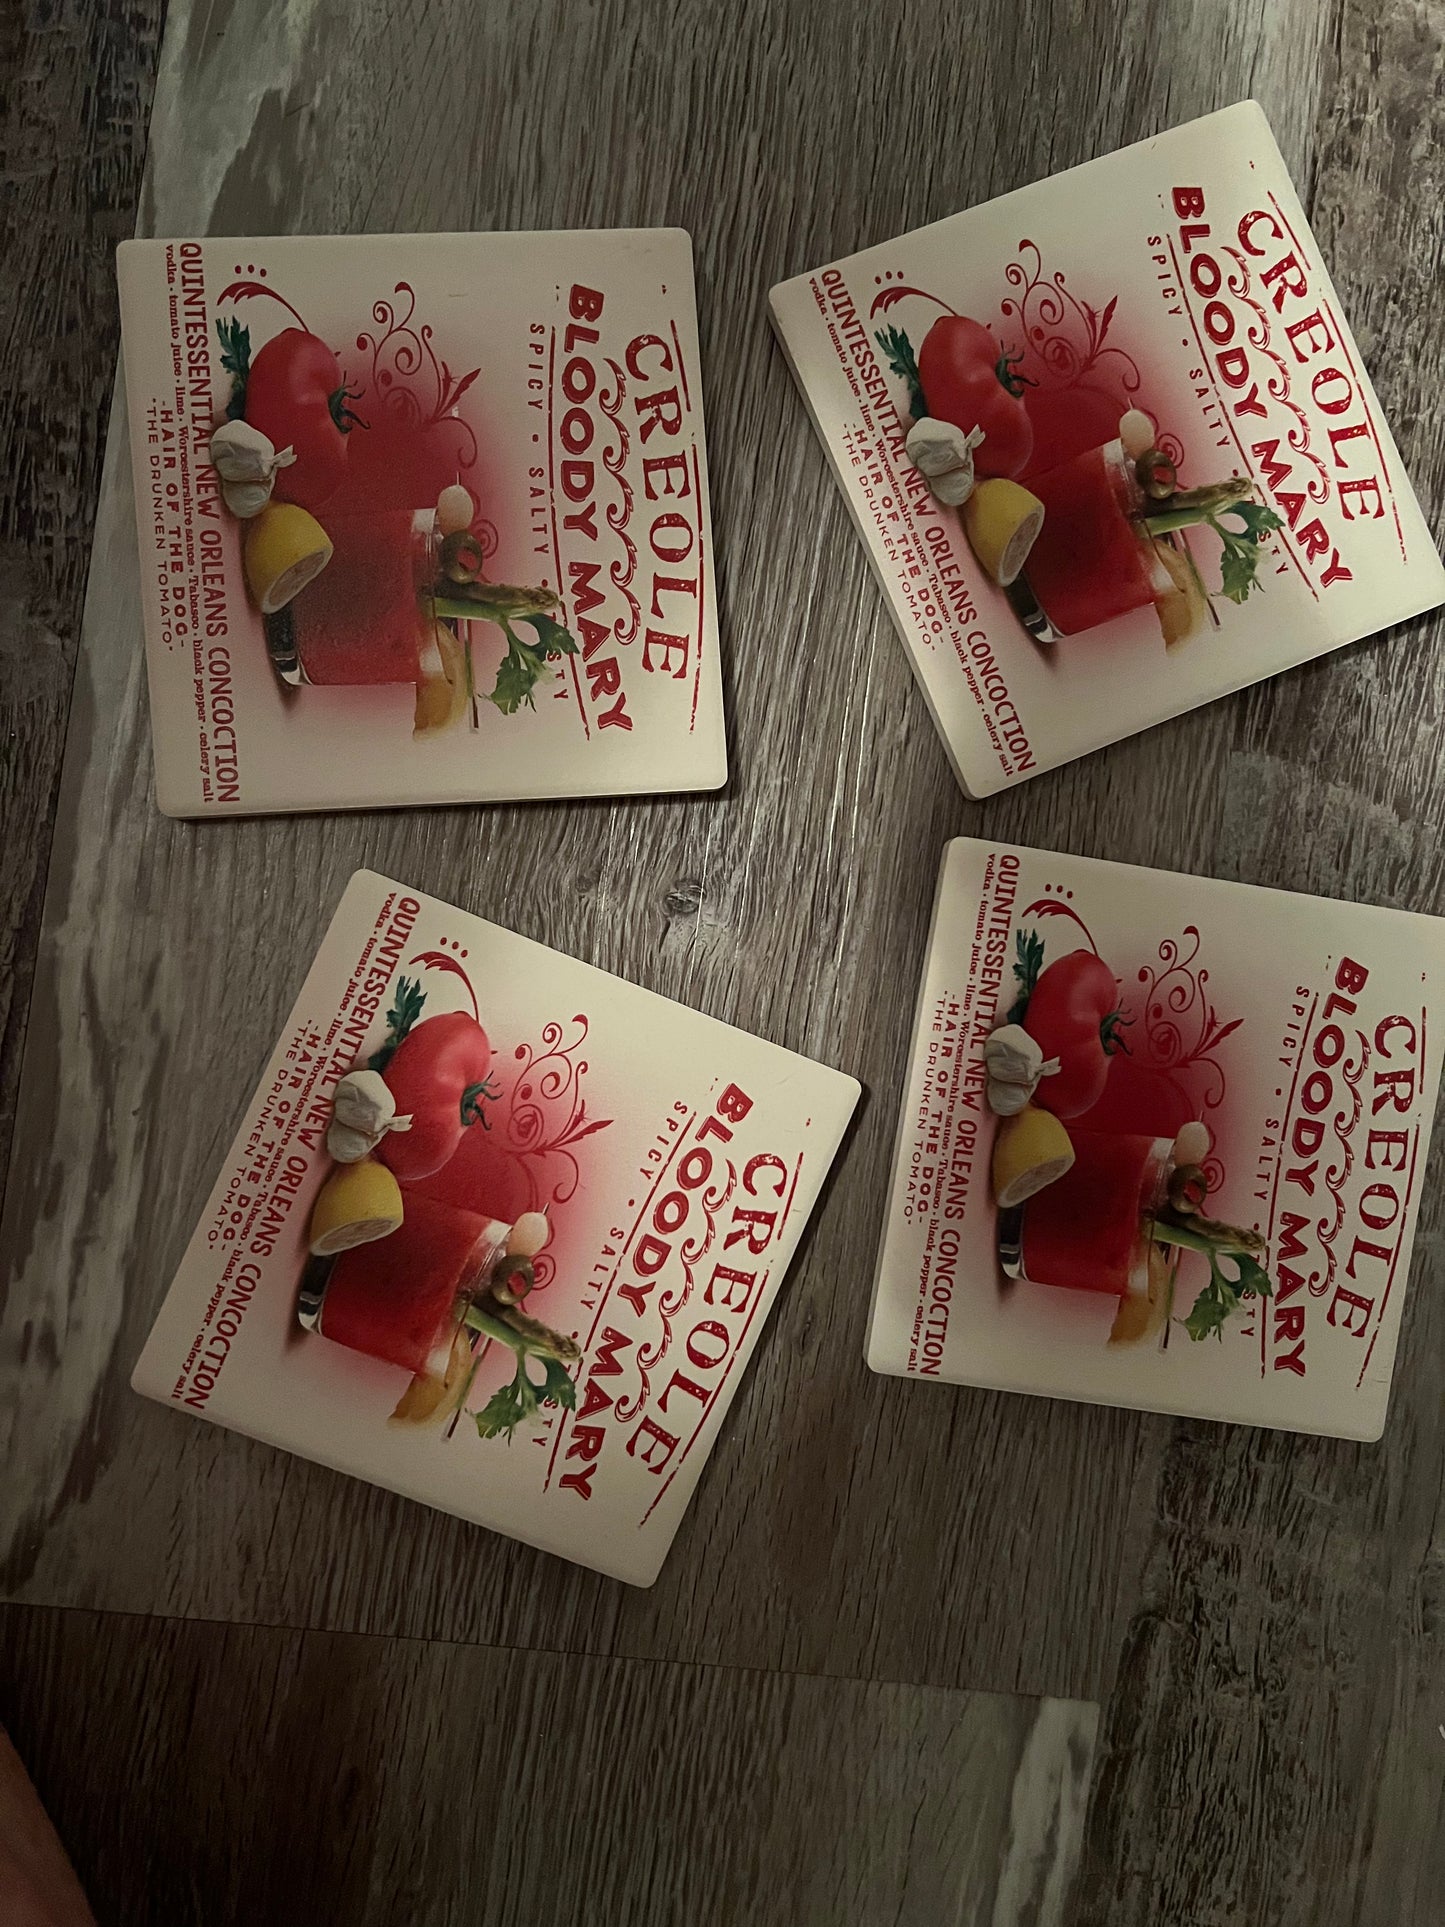 Creole Bloody Mary Coasters